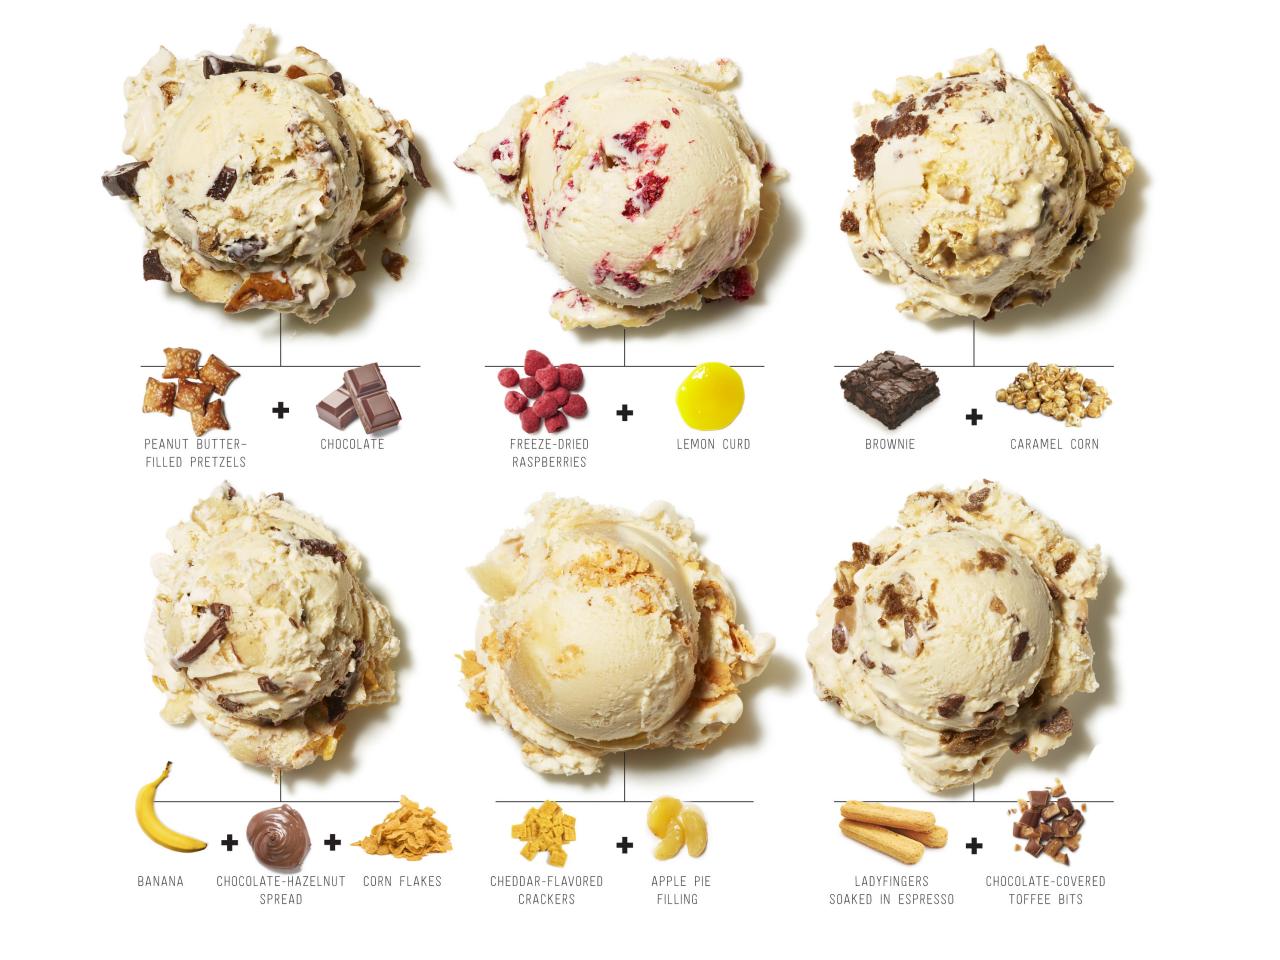 13 Must-Try Ice Cream Mash-Ups  Recipes, Dinners and Easy Meal